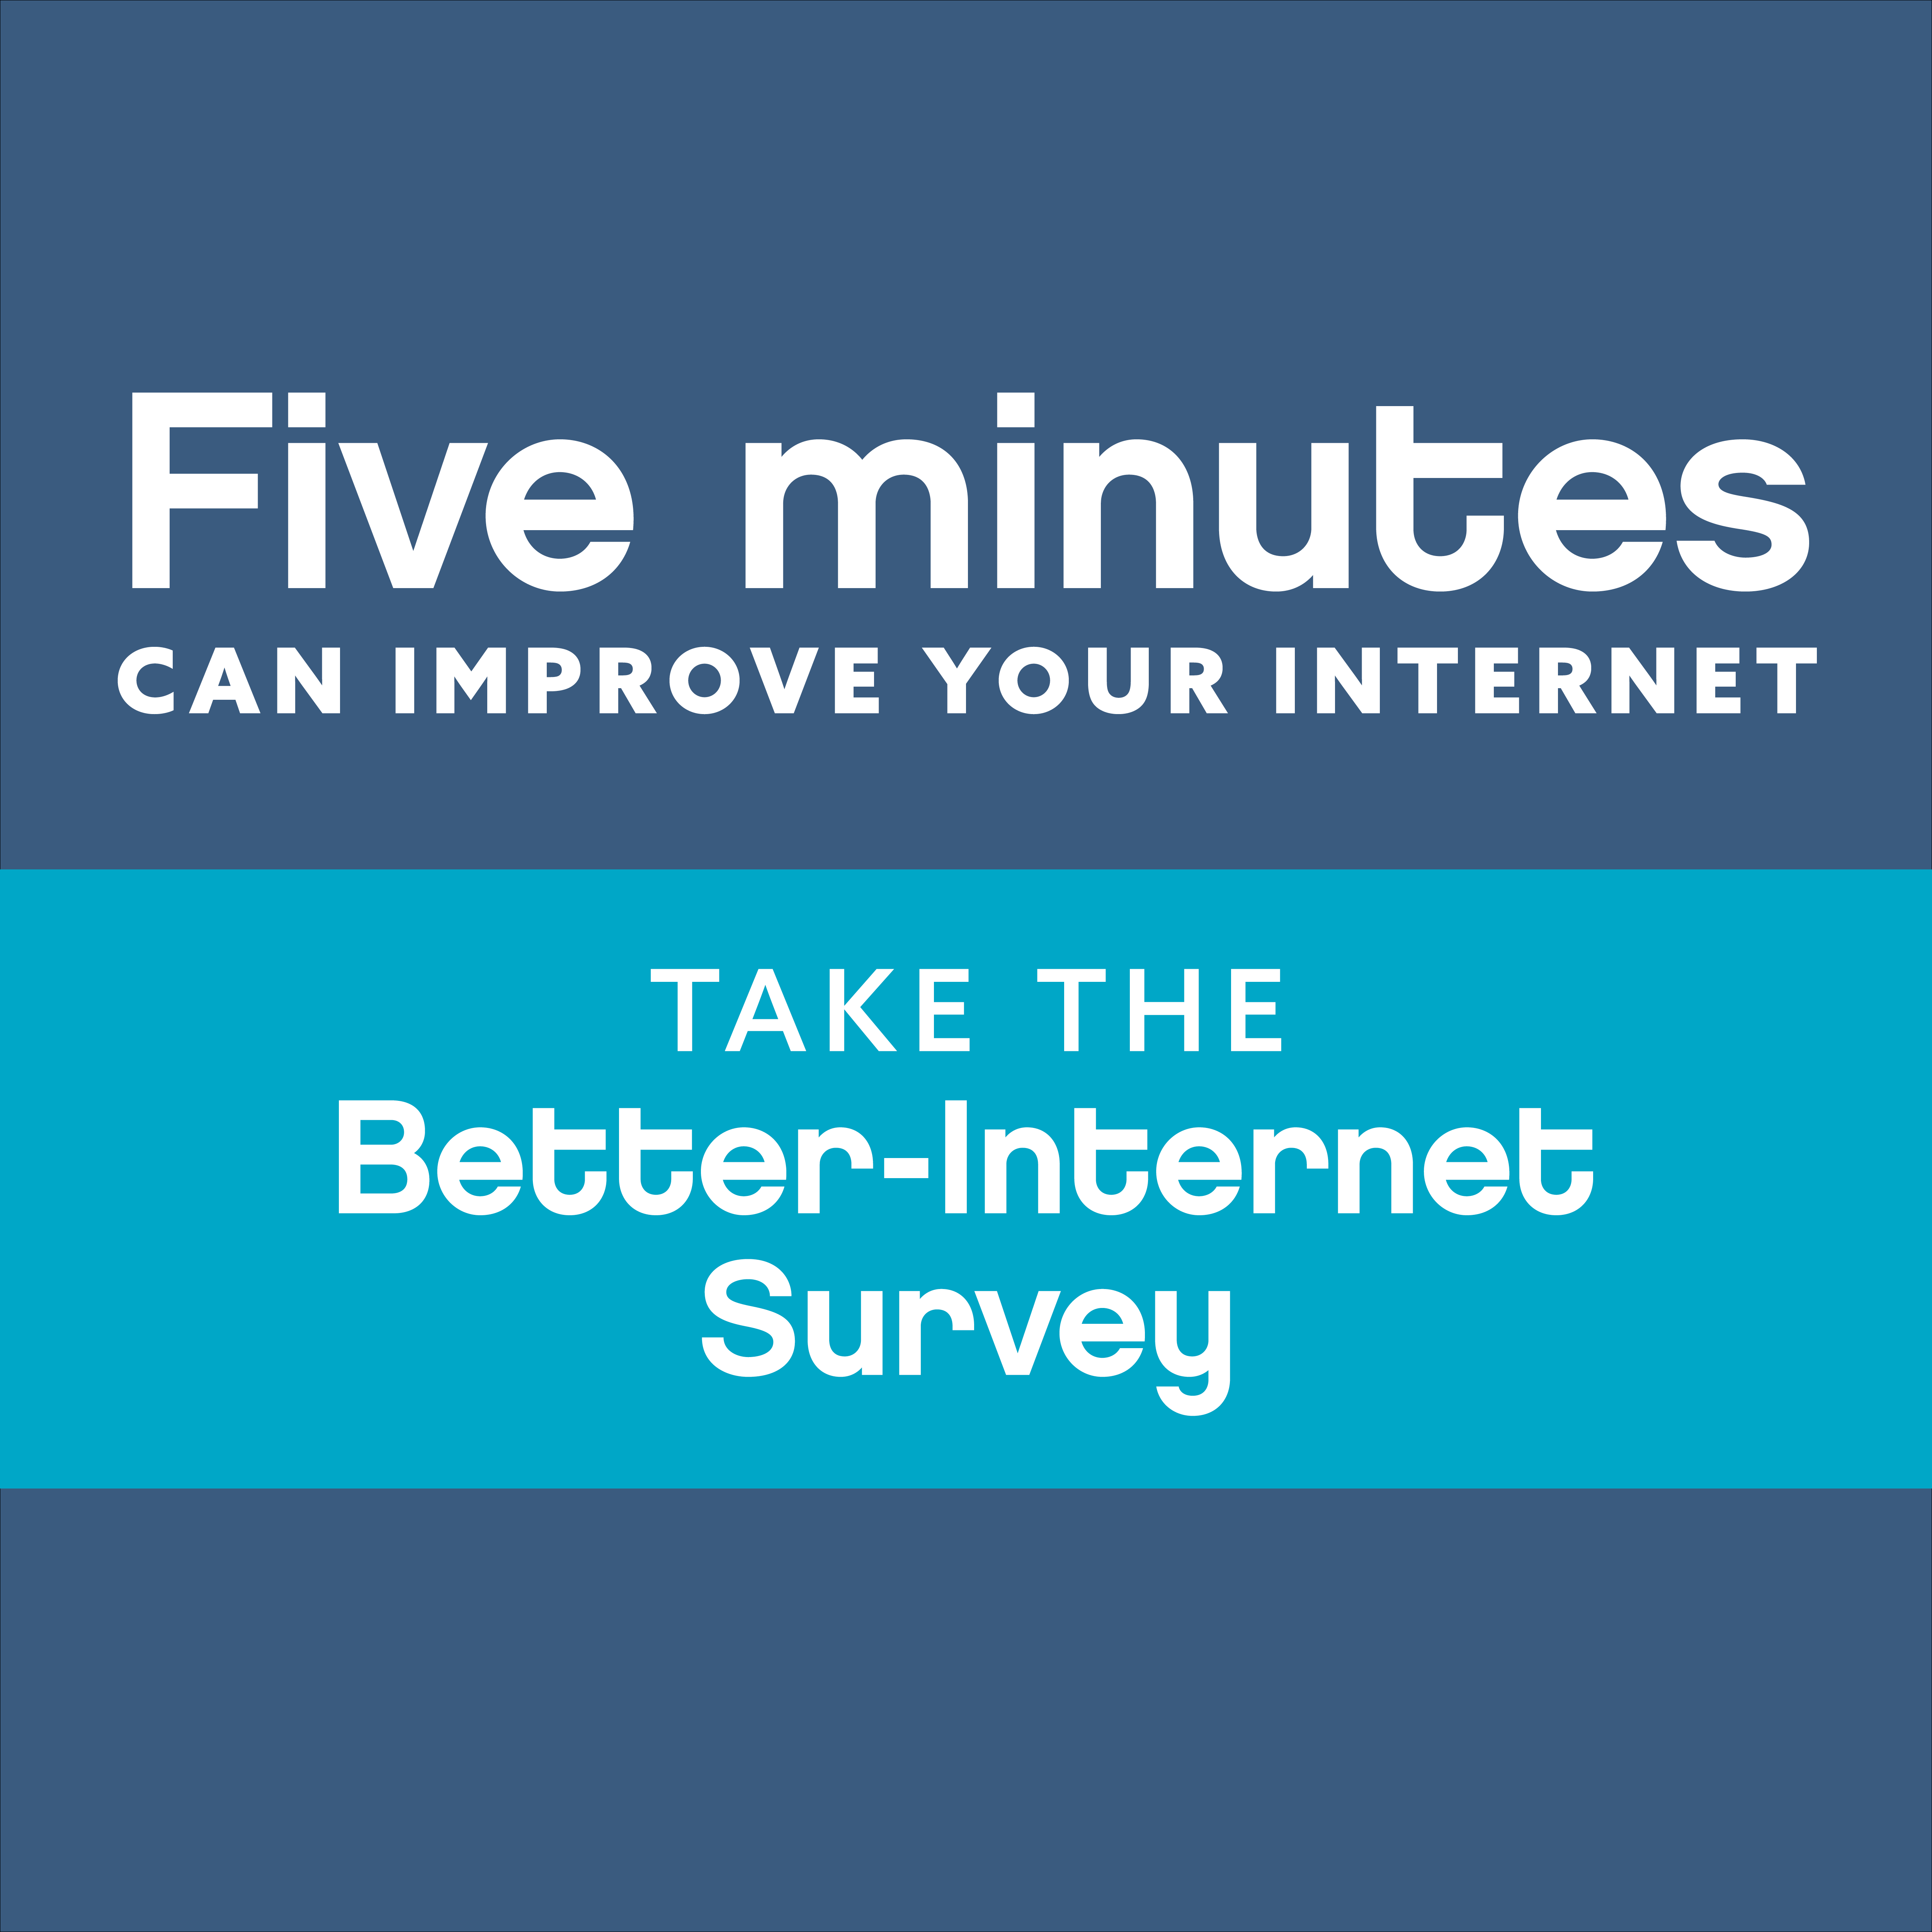 Image for Take the Better Internet Survey